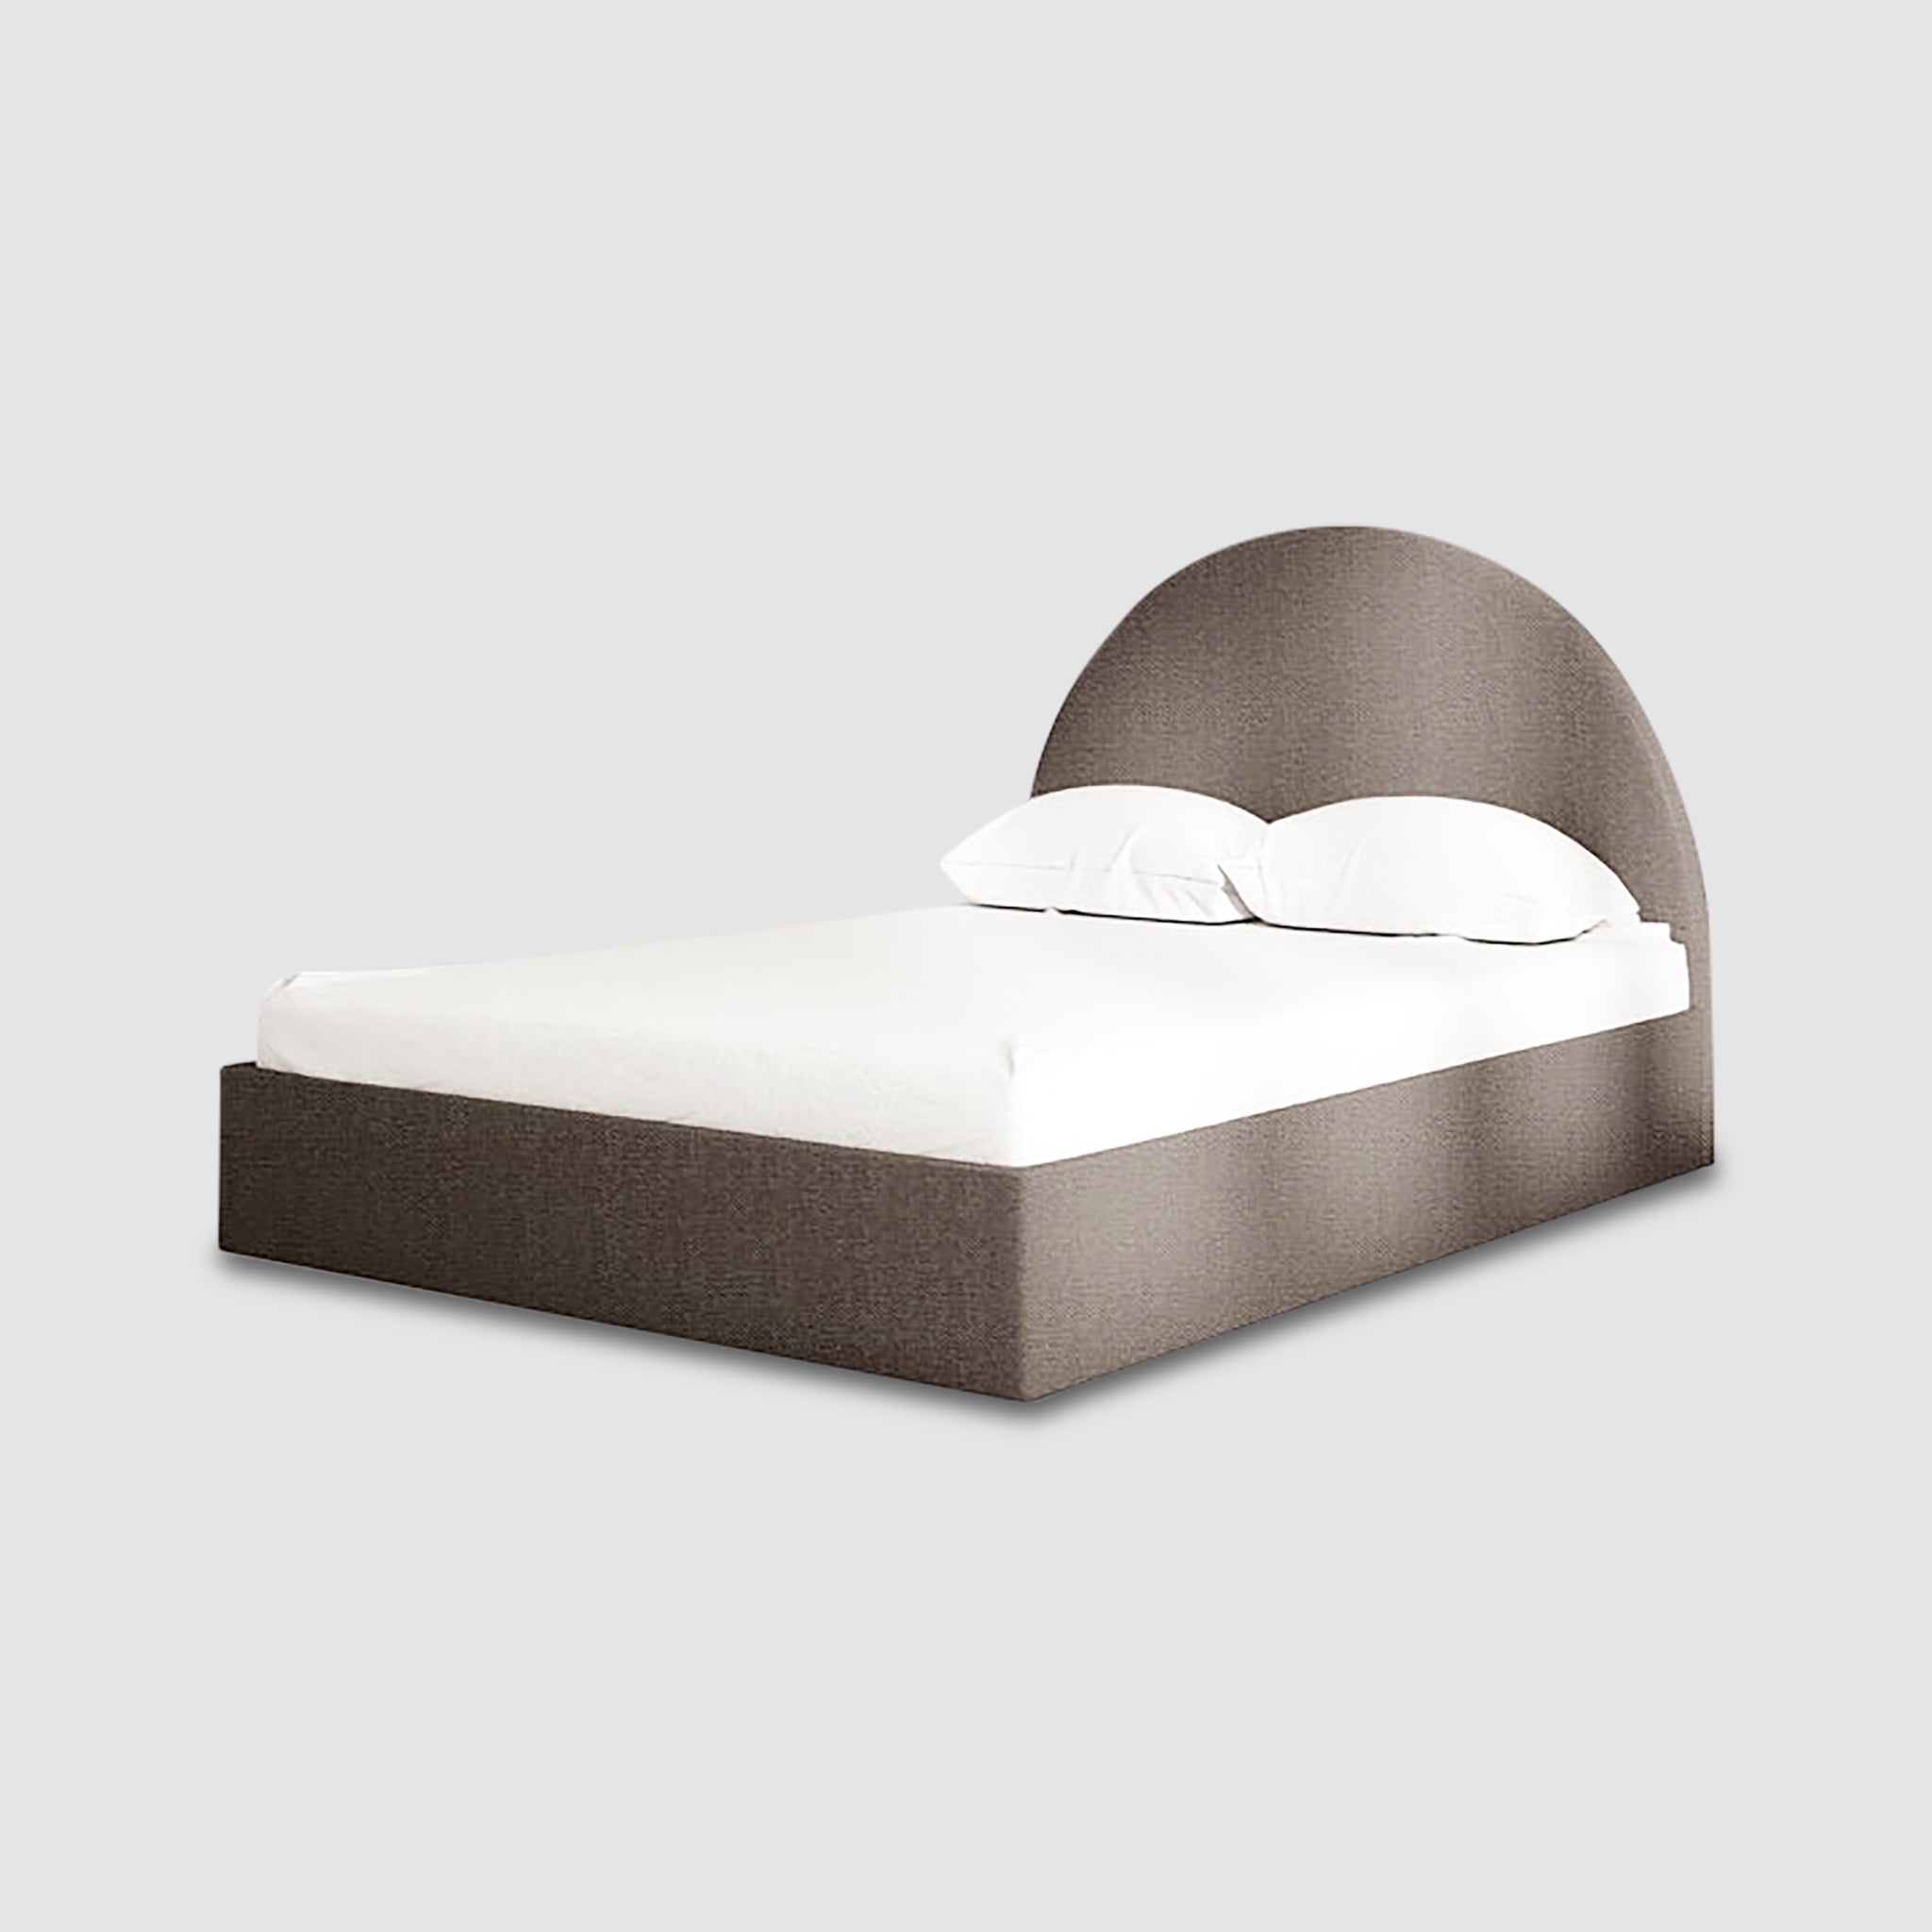 Sophisticated Archie Bed with a compact design and textured grey headboard.